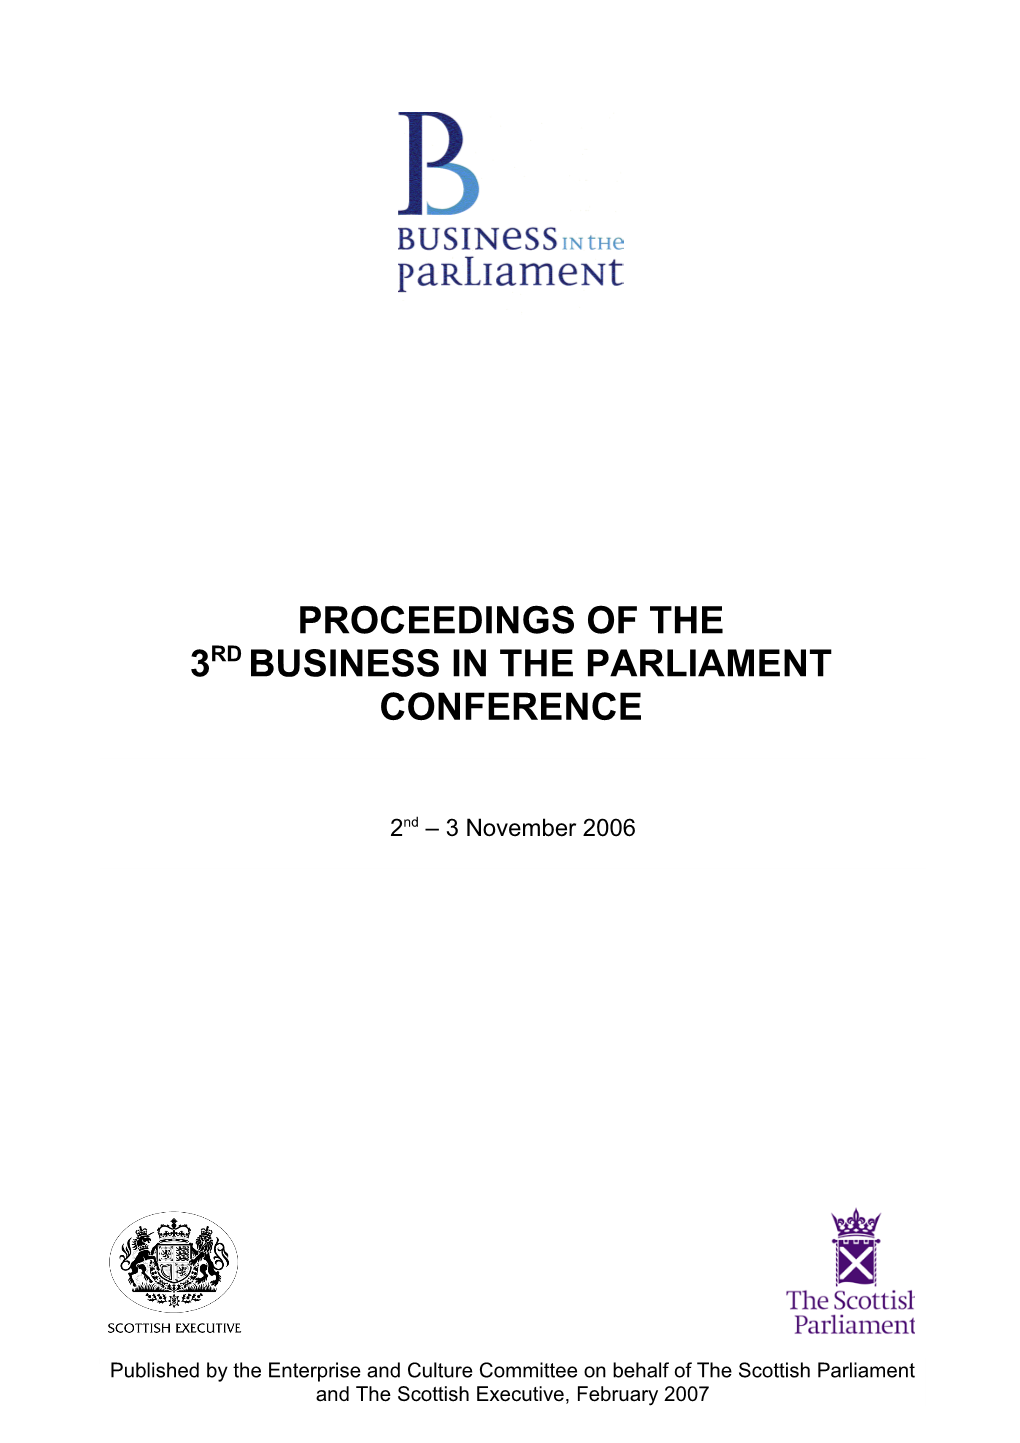 PROCEEDINGS of the 3Rd Business in the Parliament CONFERENCE